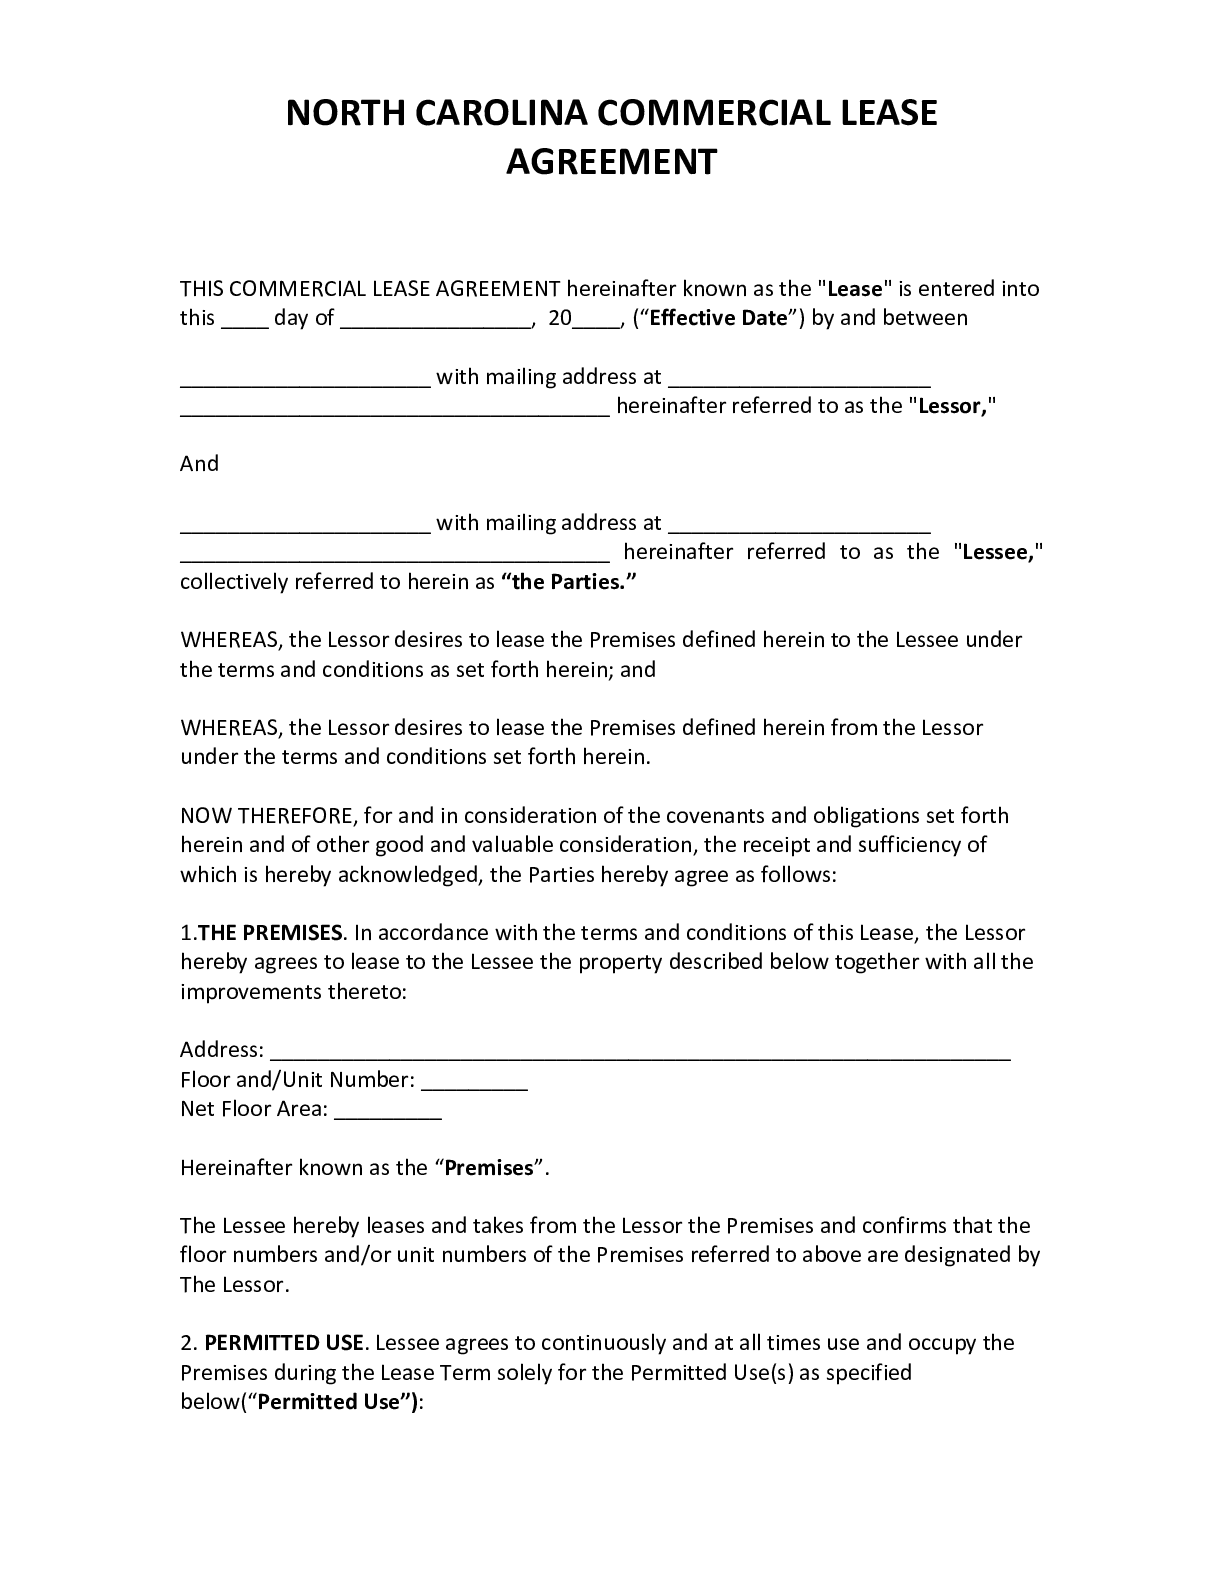 Official North Carolina Commercial Lease Agreement 2021 Pdf Form